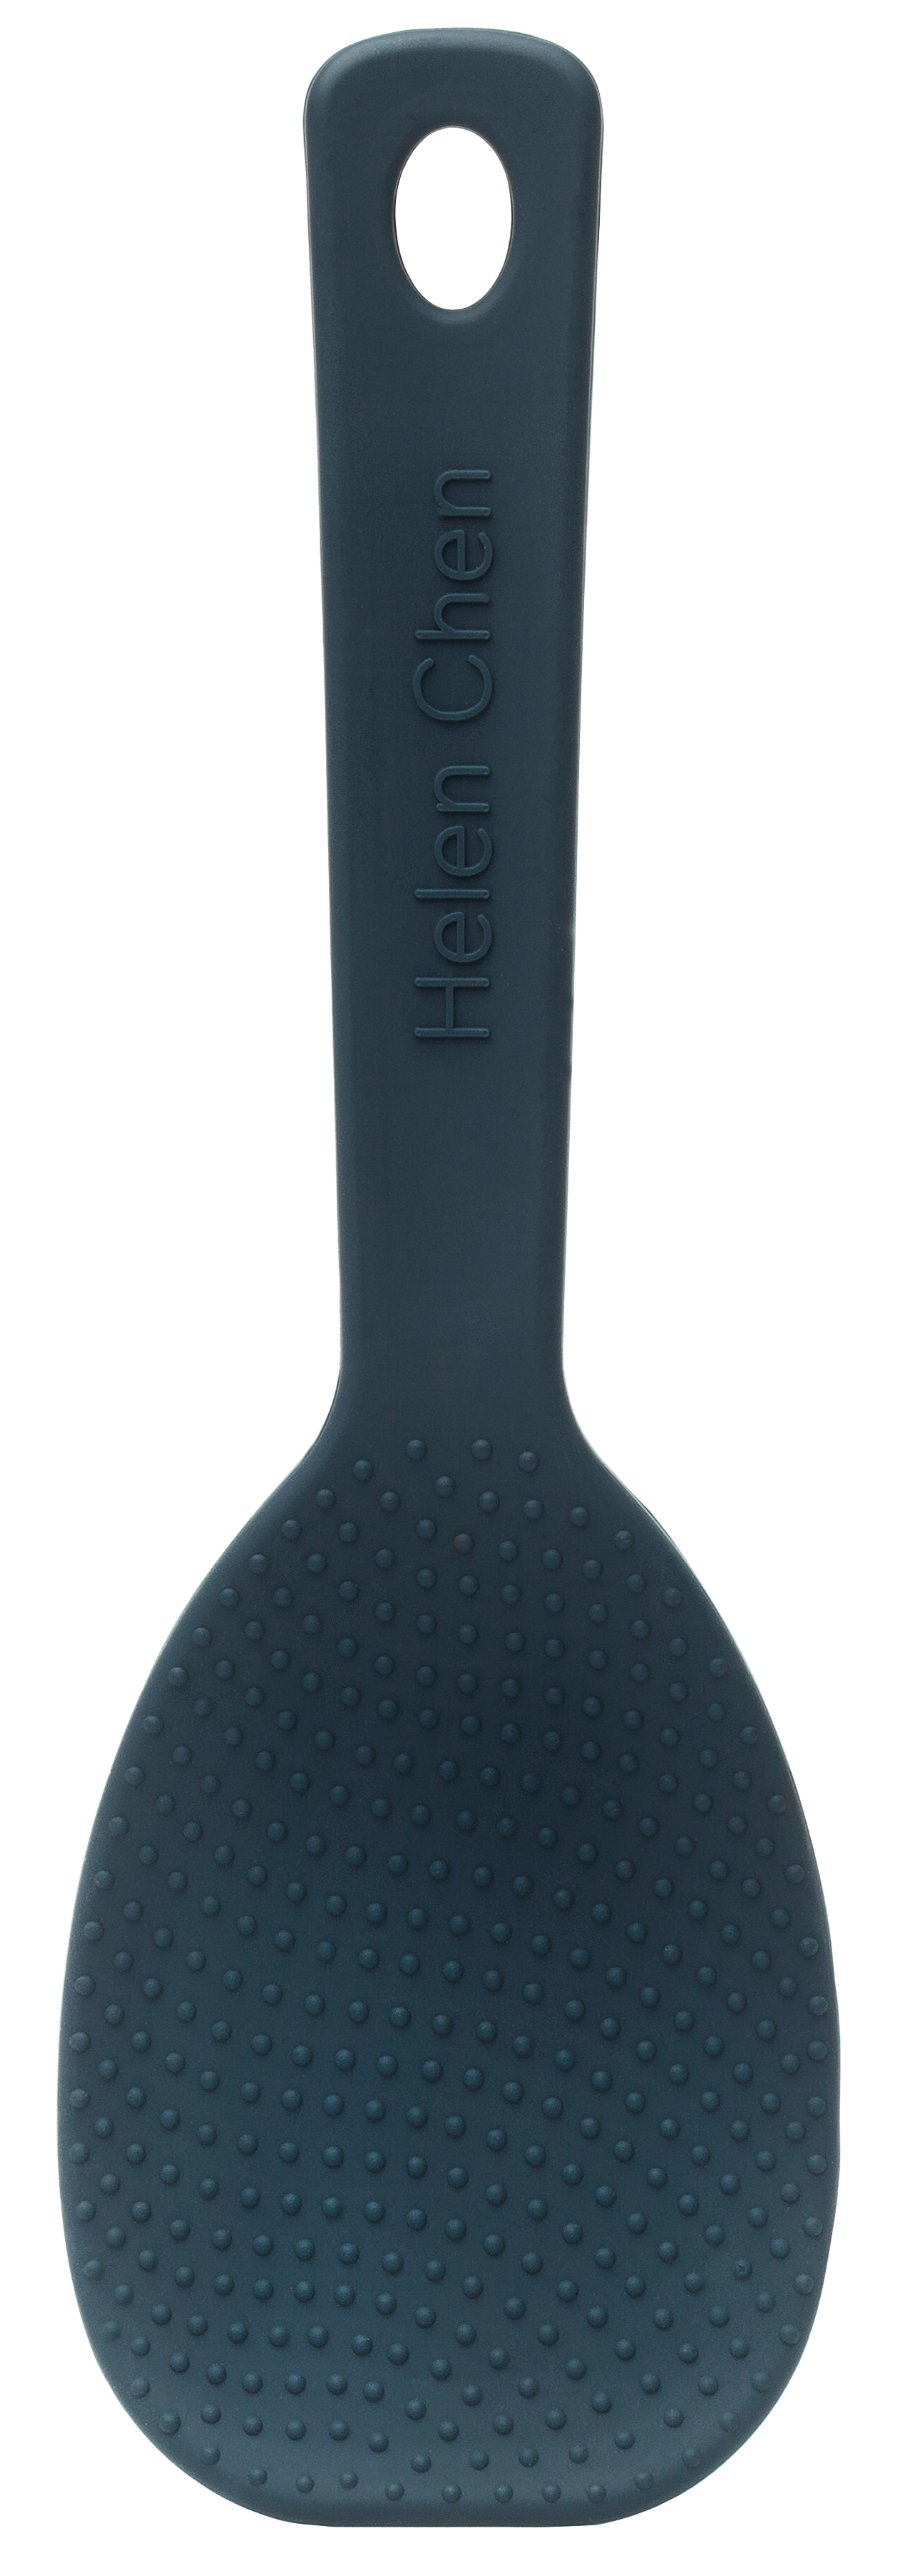 Helen's Asian Kitchen 97113 Never-Stick Rice Paddle 8.5-Inch Heat-Resistant Silicone